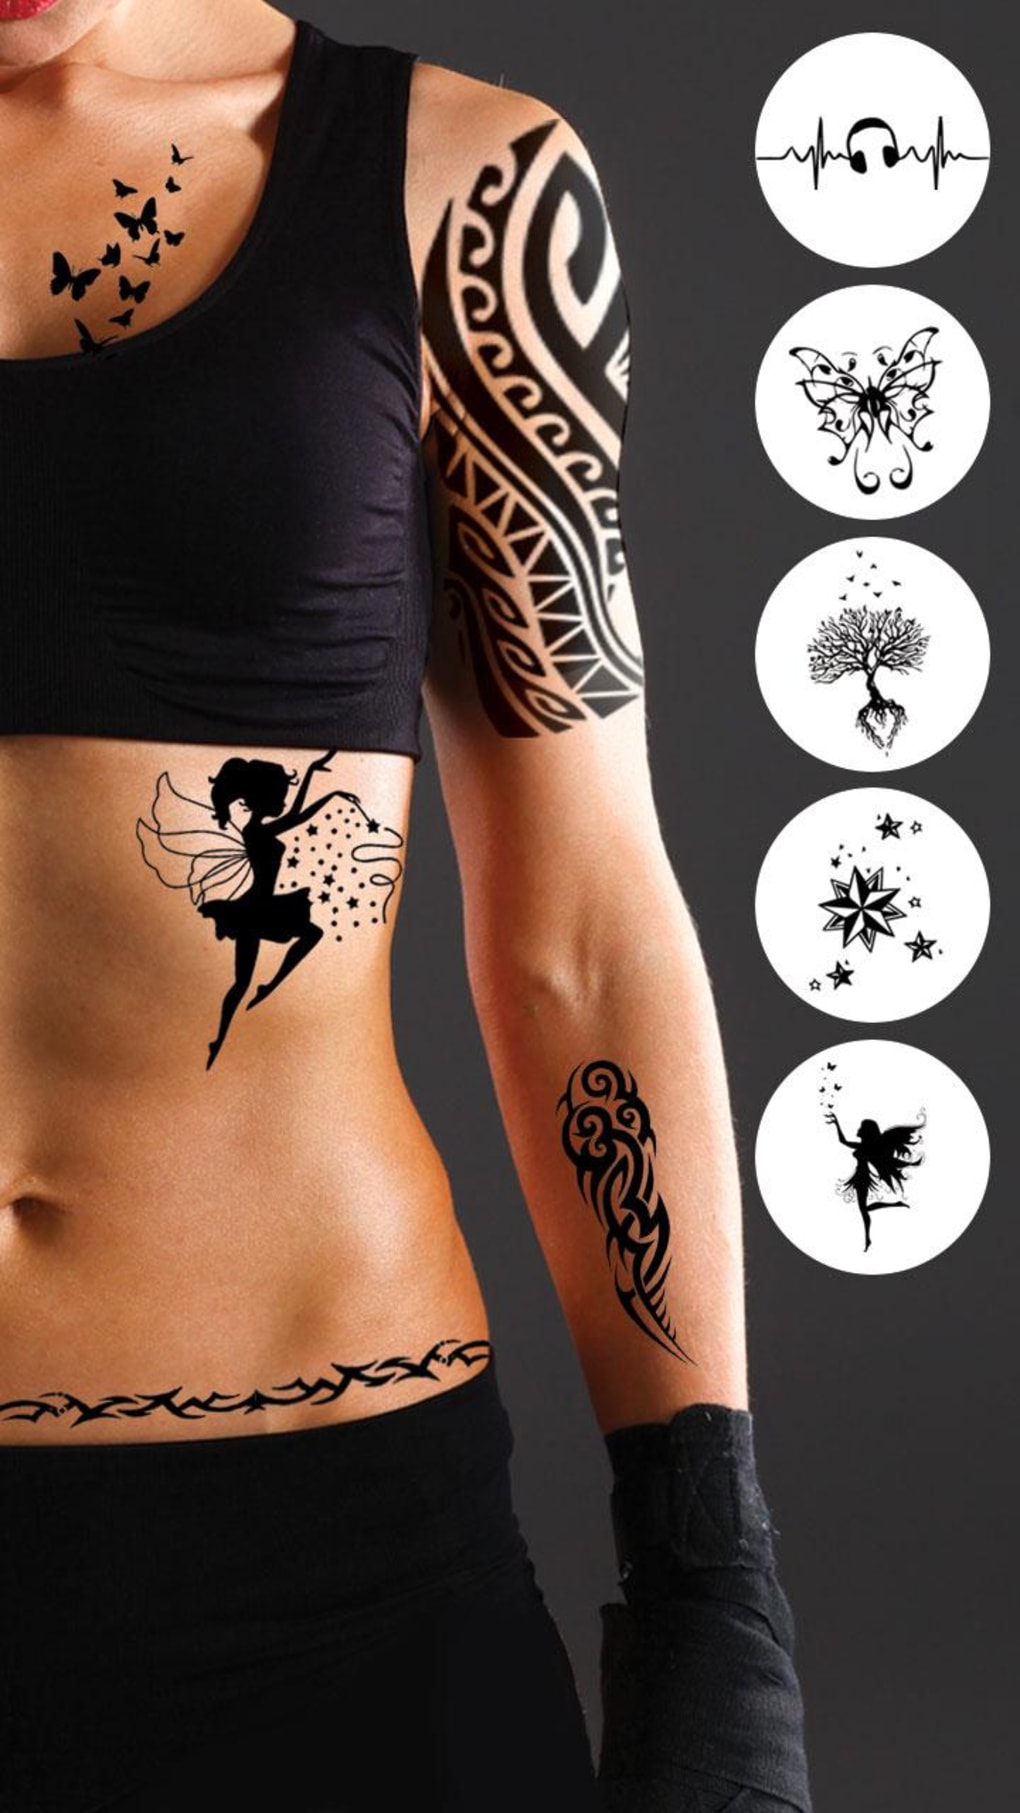 Tattoo Photo Editor APK - Free download for Android